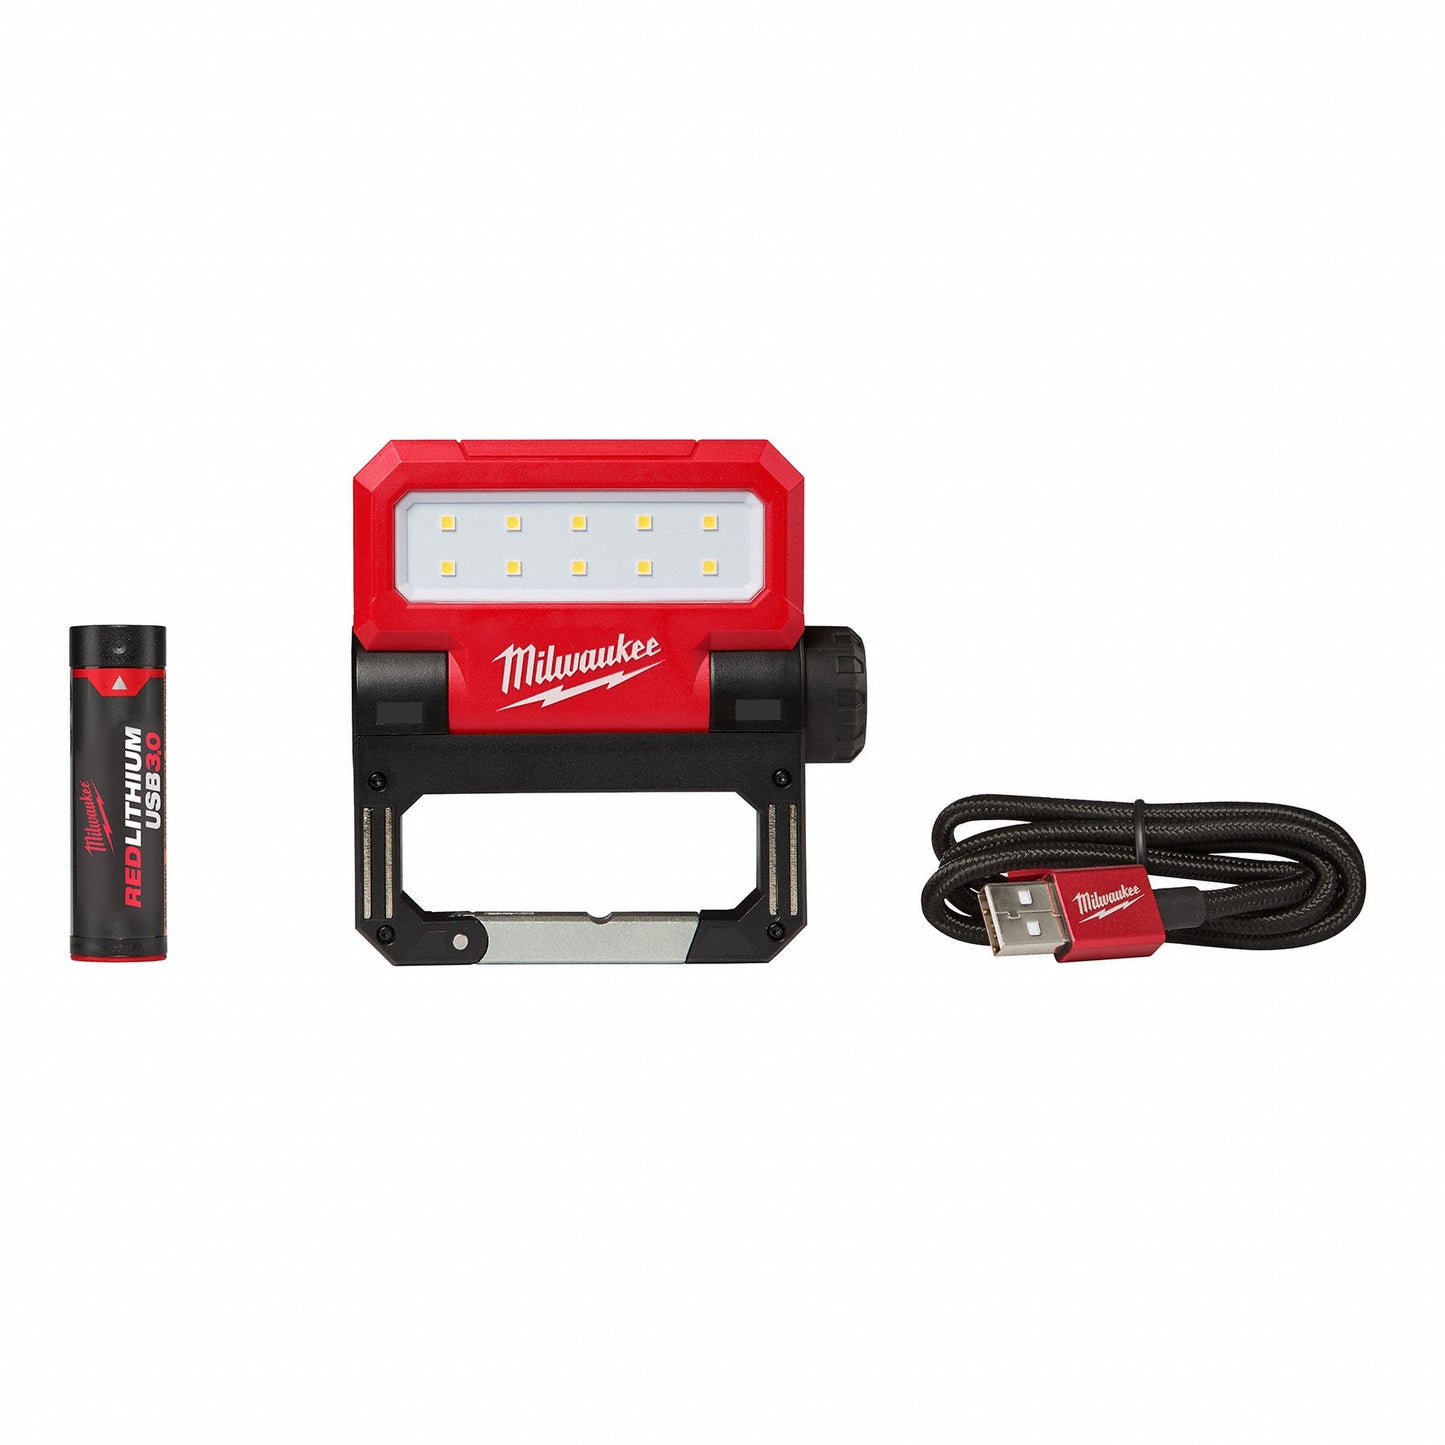 MILWAUKEE USB Rechargeable ROVER Pivoting Flood Light